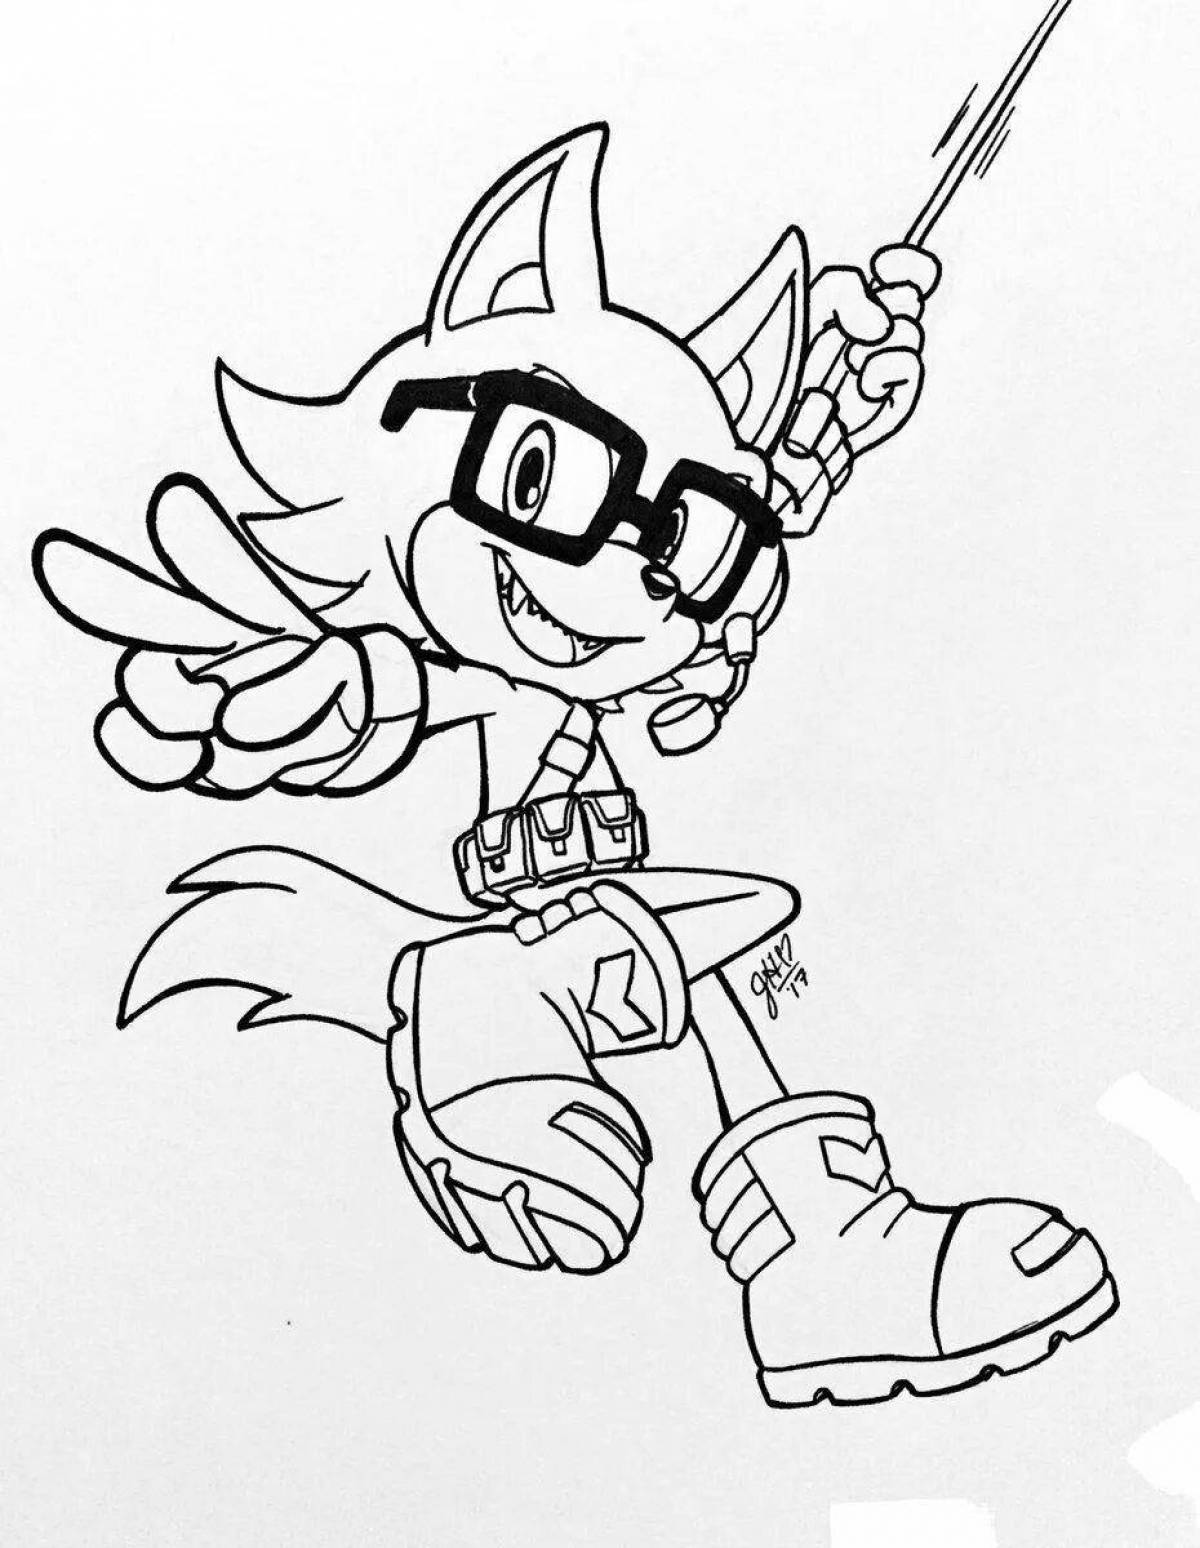 Infinity sonic bright coloring page